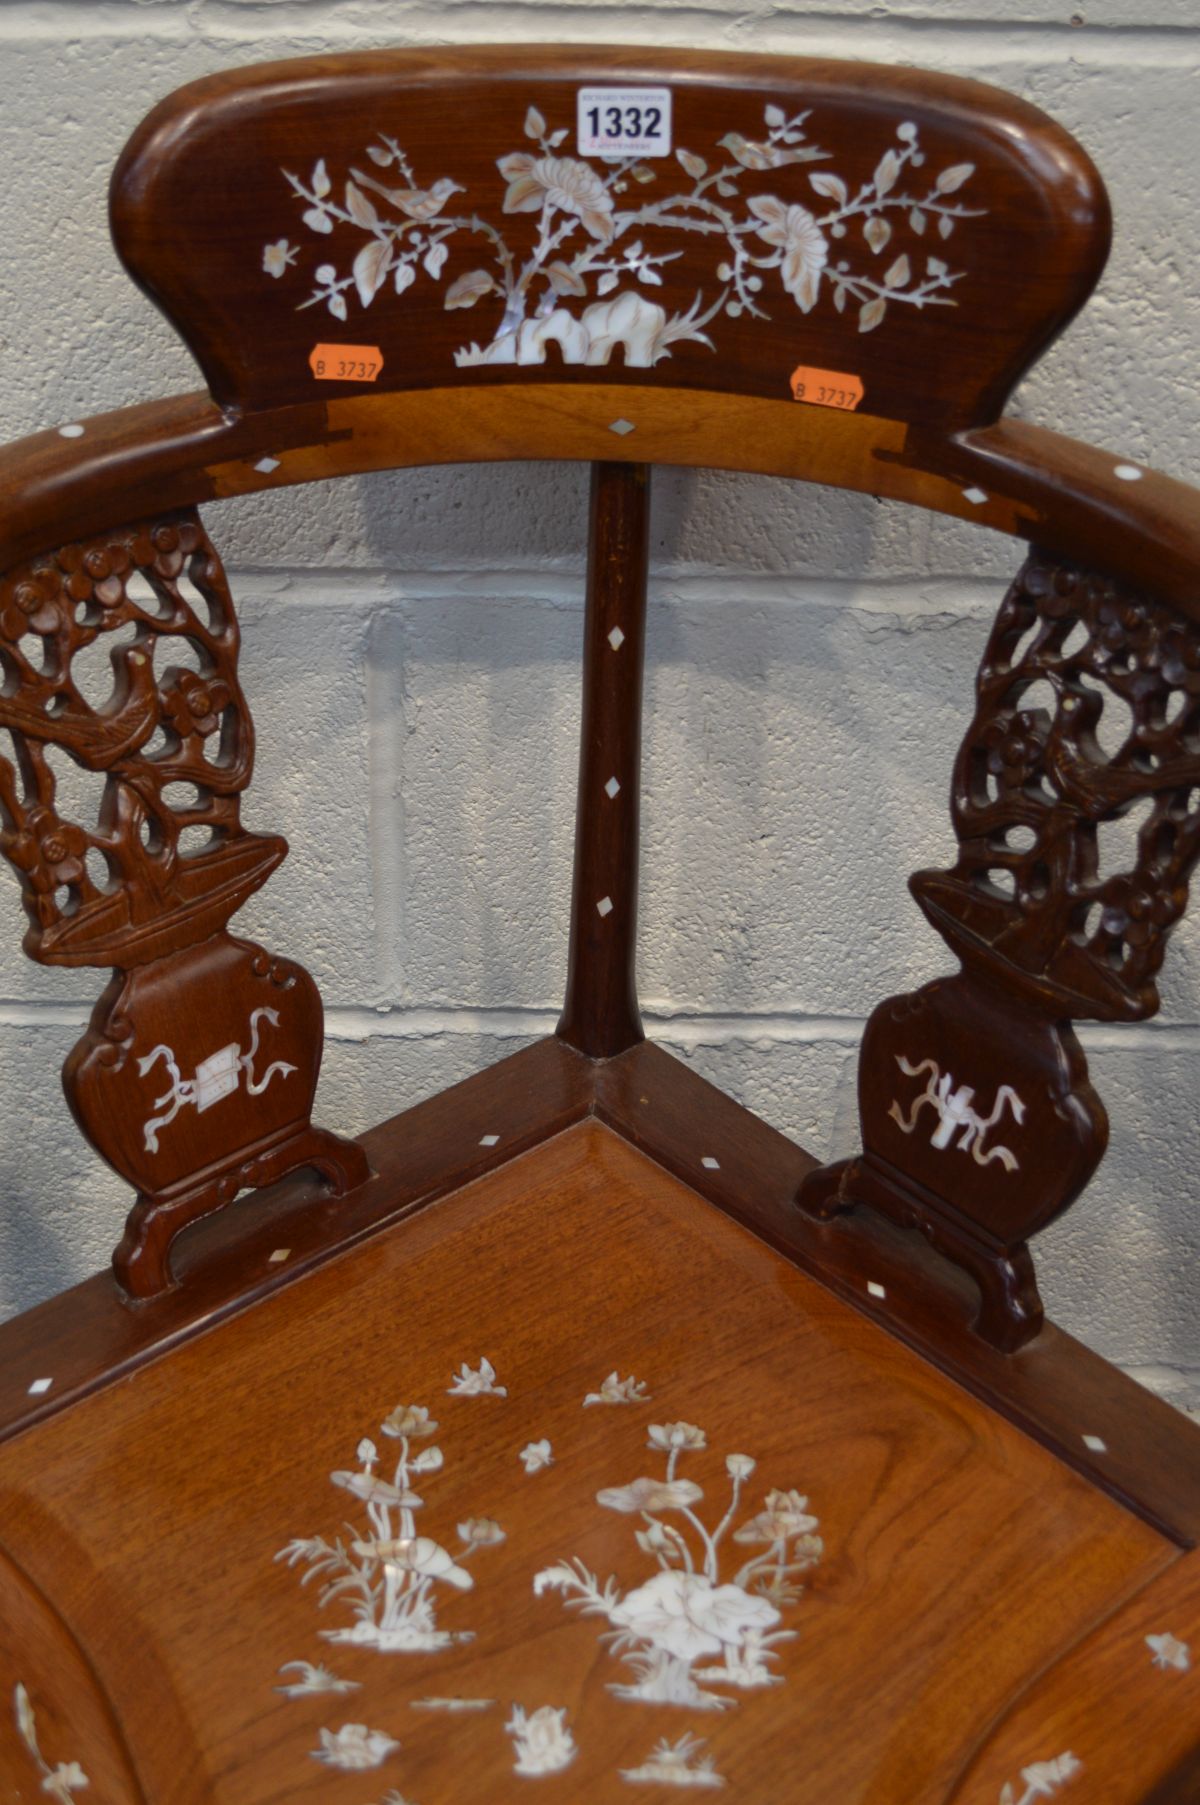 A NEAR PAIR OF MID TO LATE 20TH CENTURY ORIENTAL HARDWOOD CORNER CHAIRS, with mother of pearl - Image 3 of 7